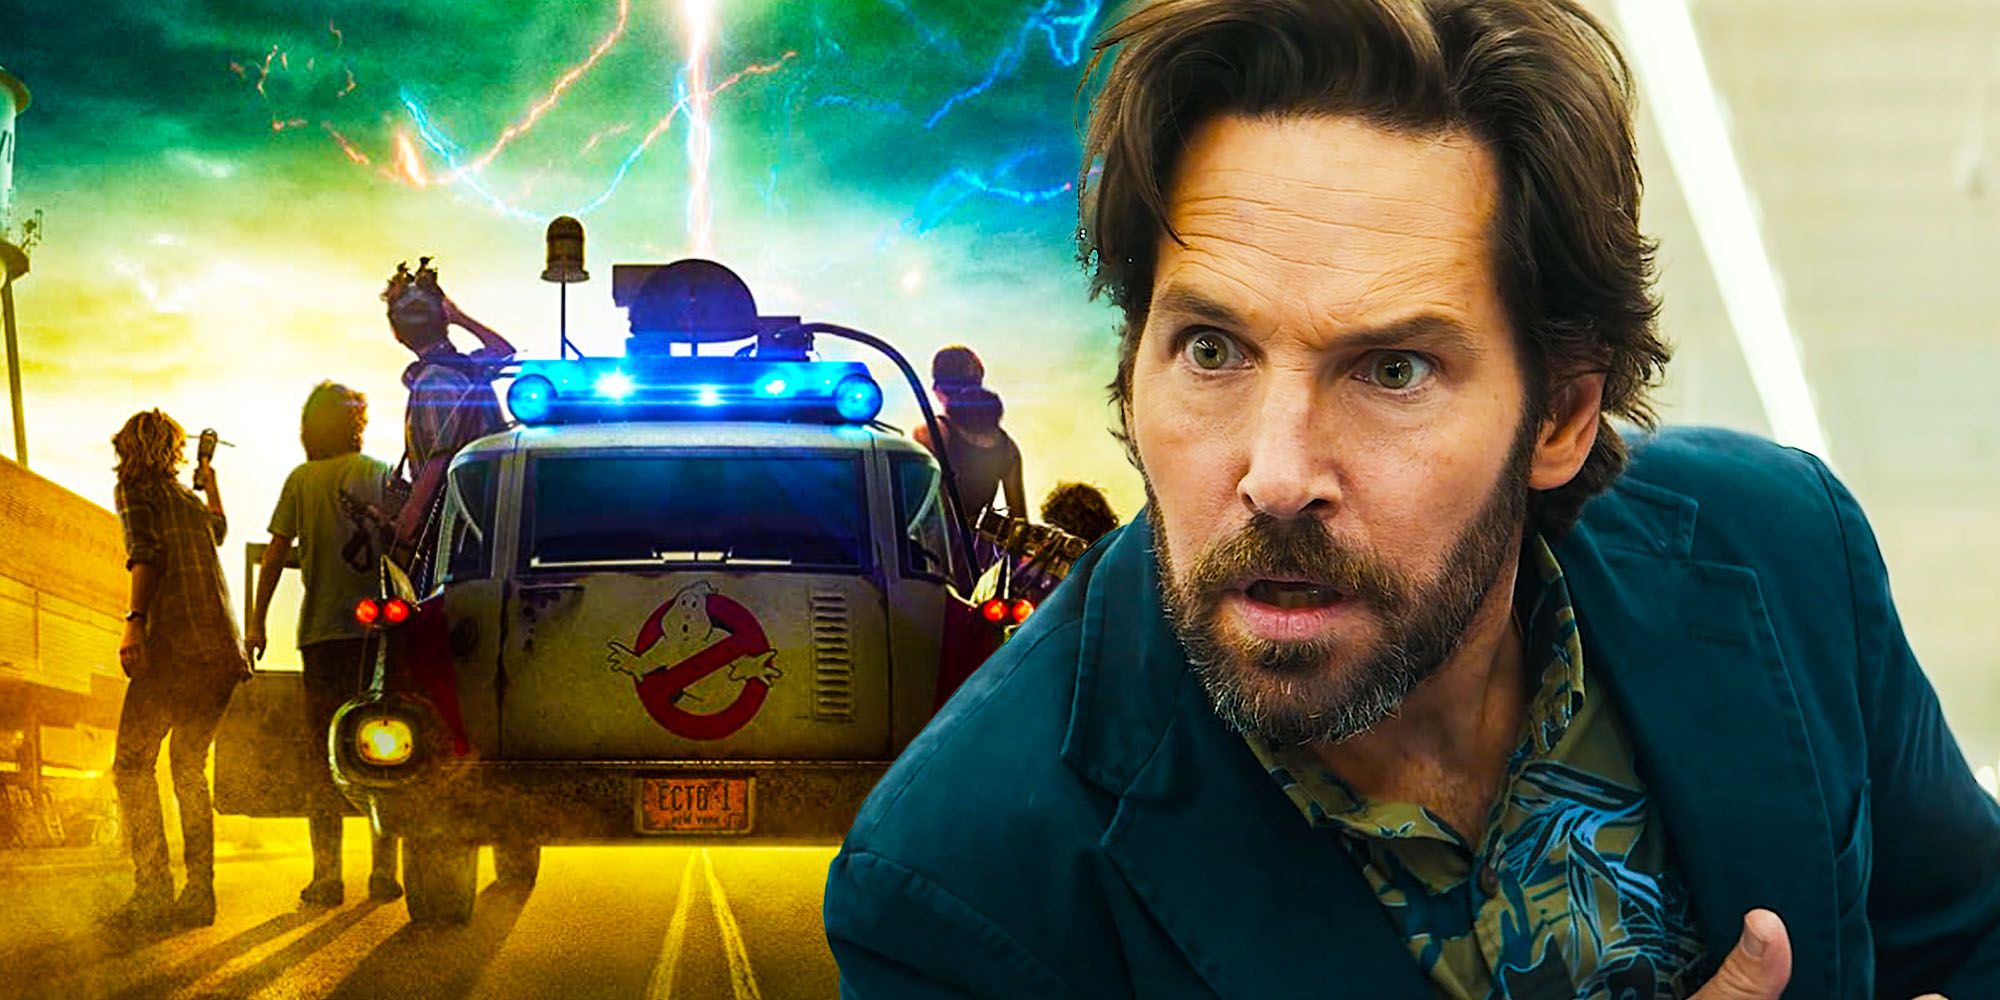 Ghostbusters 4 Theory: Paul Rudd’s Mr Grooberson Will Become A Ghostbuster